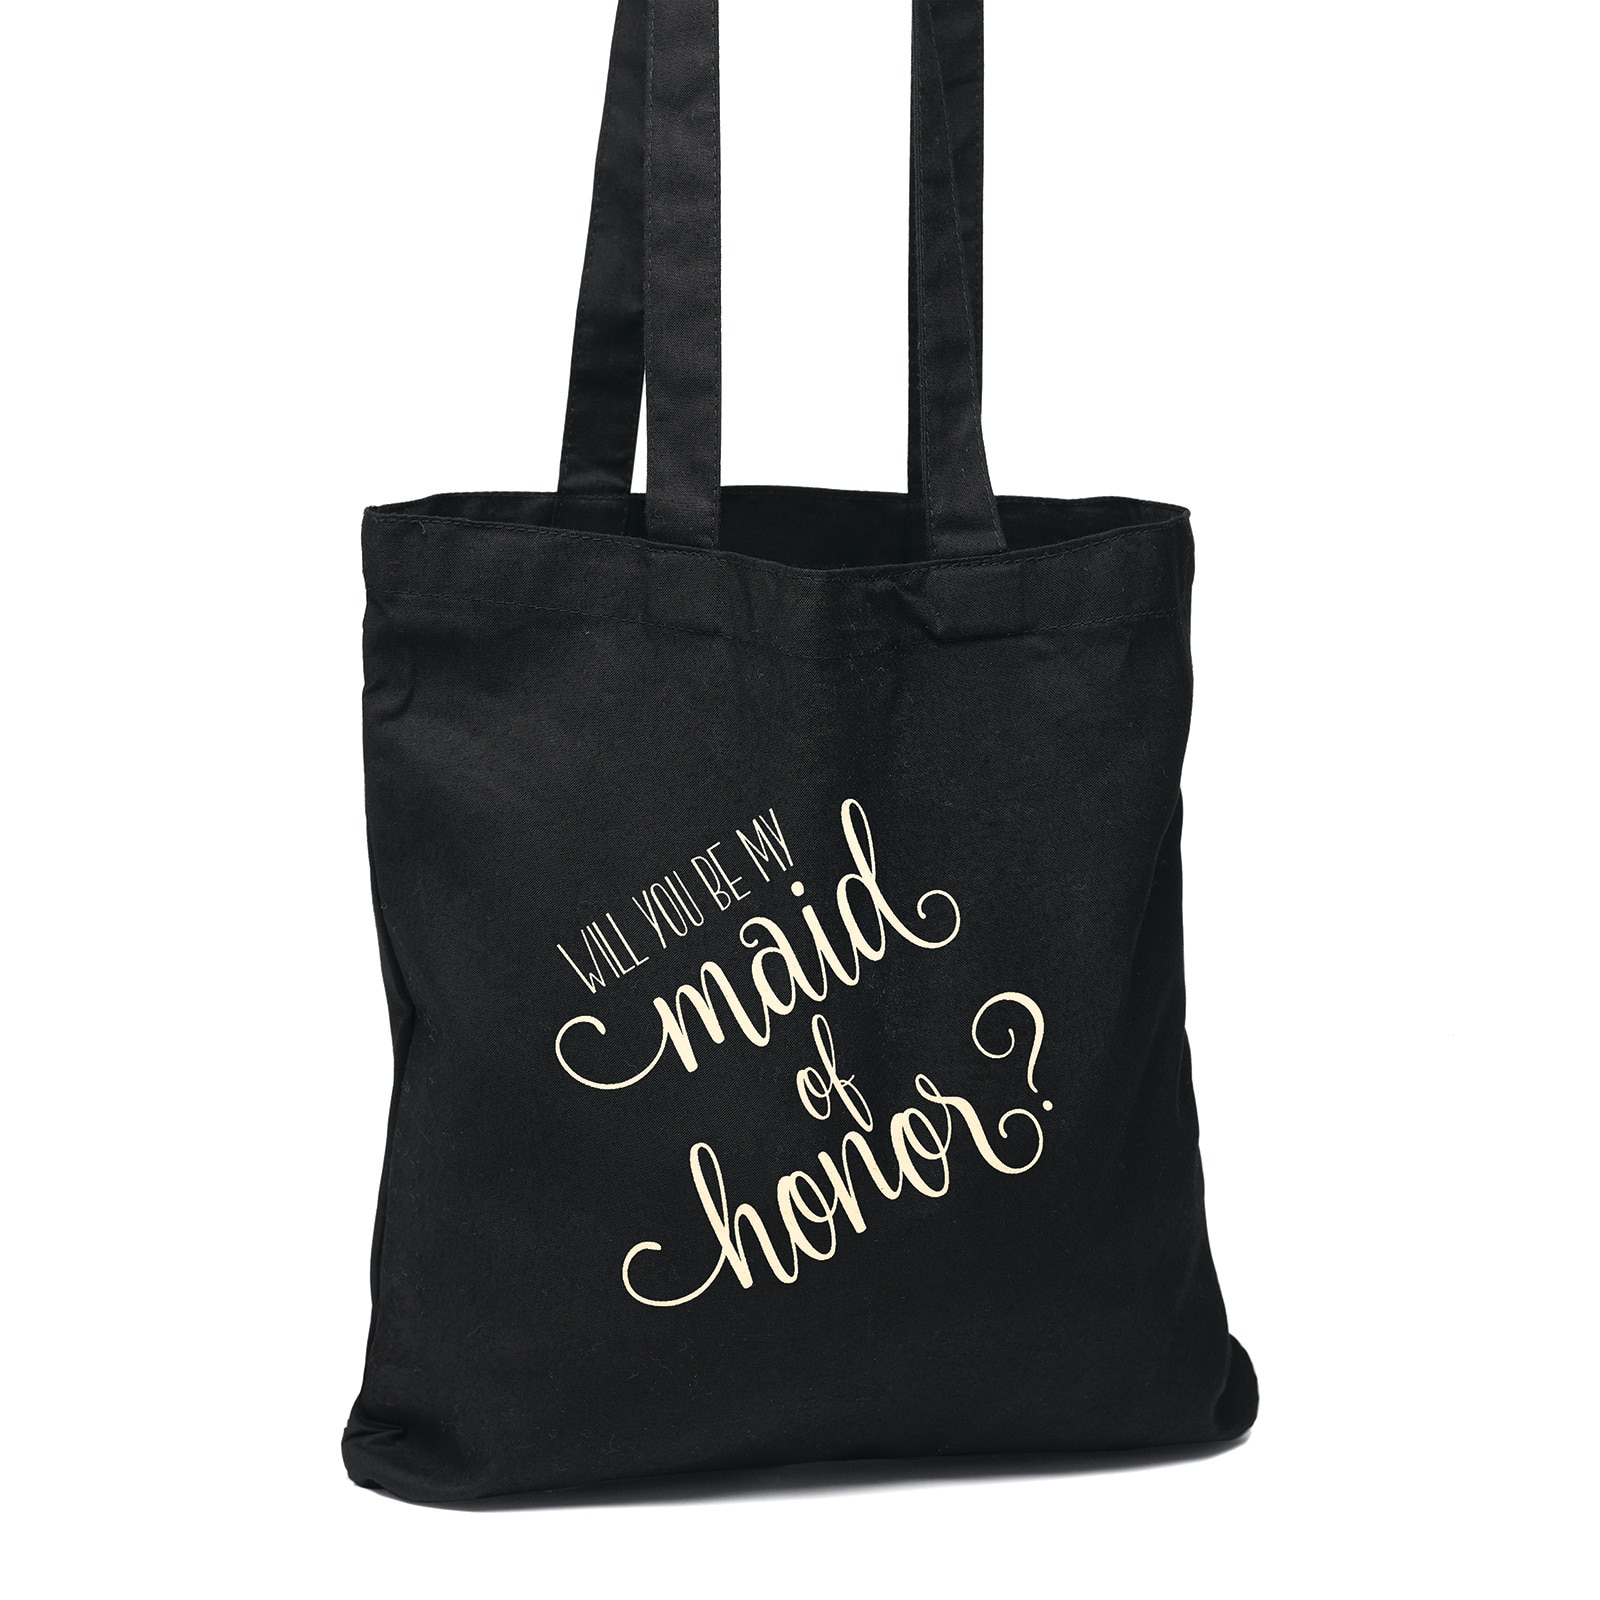 Hortense B. Hewitt Co. Will You Be My Maid of Honor Black Tote Bag